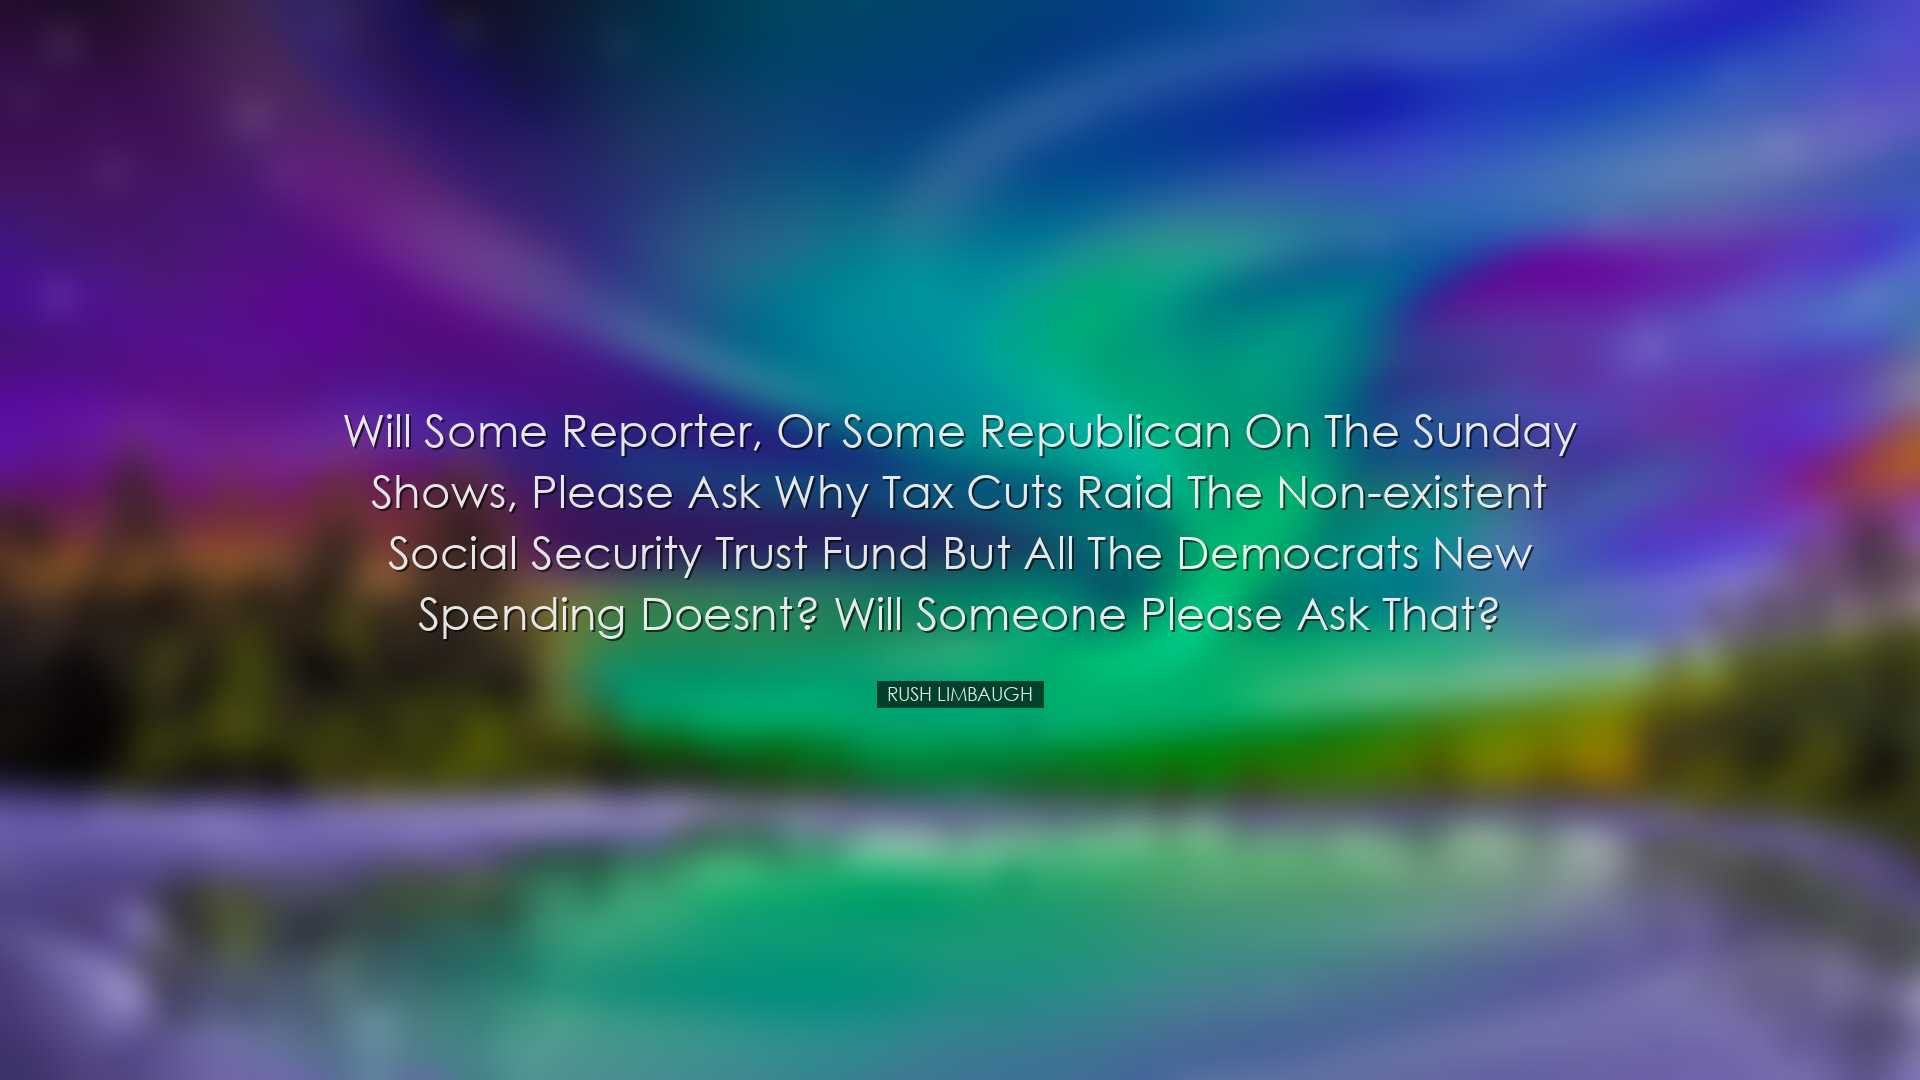 Will some reporter, or some Republican on the Sunday shows, please